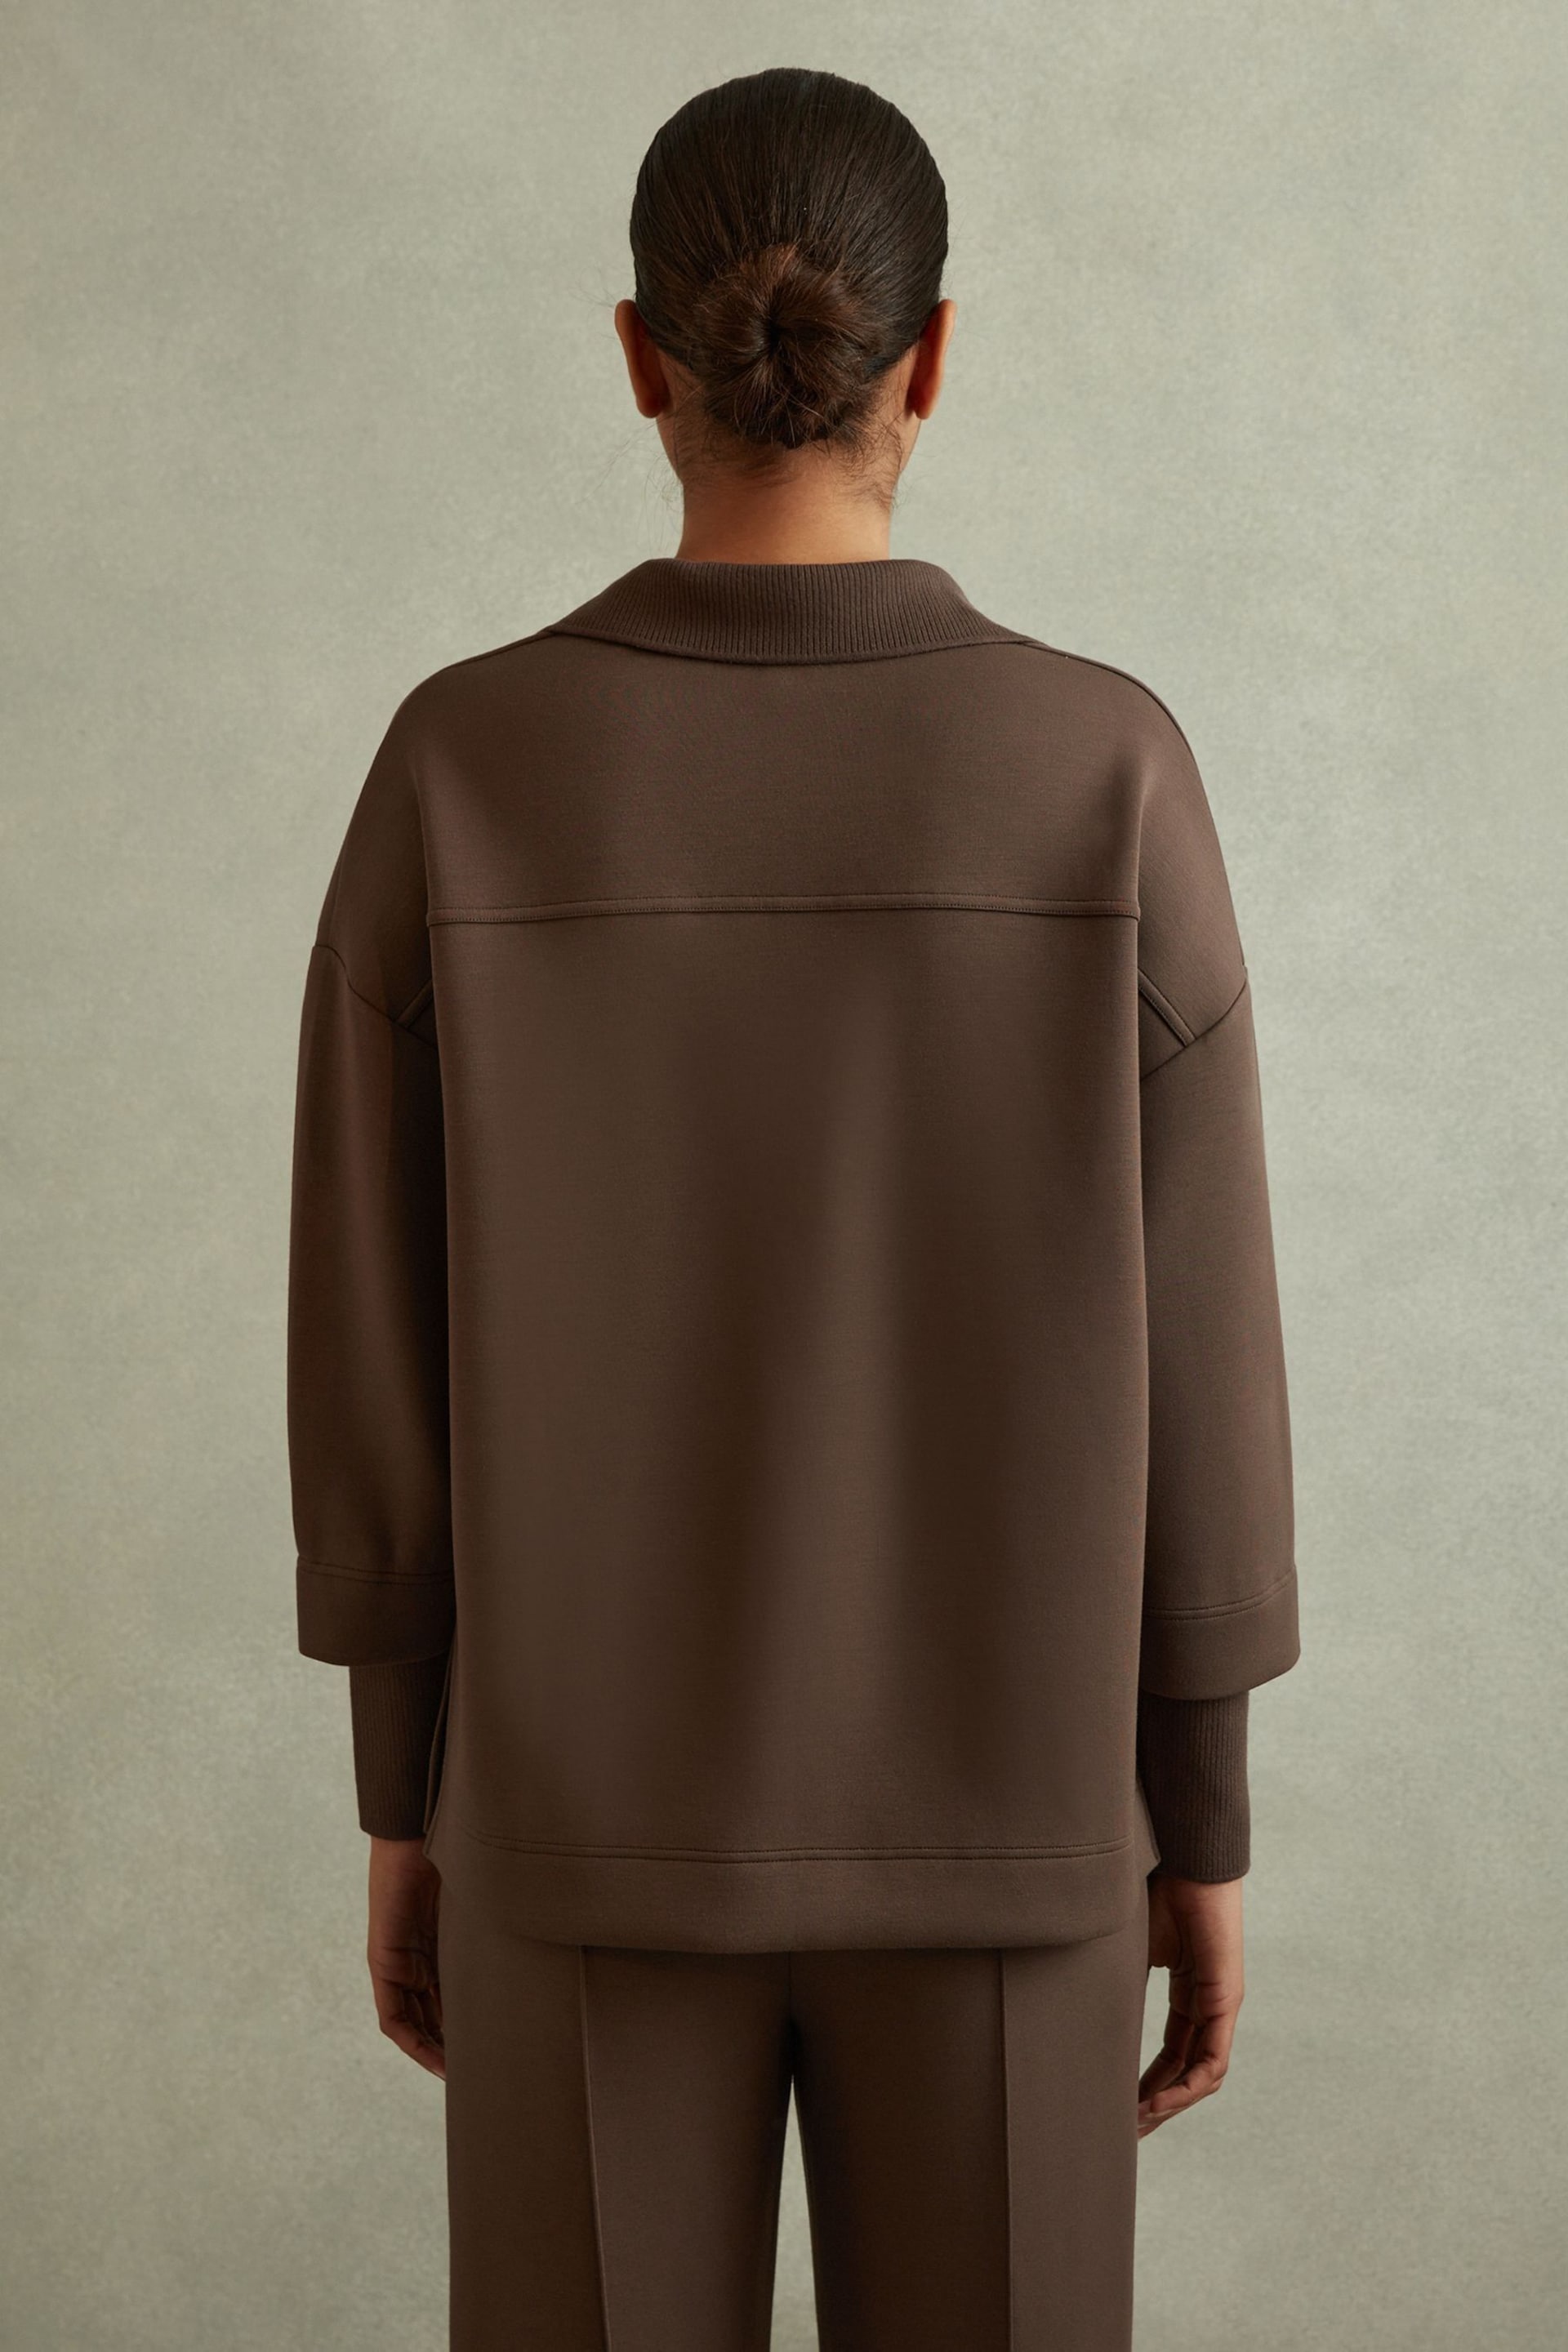 Reiss Chocolate Bernie Relaxed Open-Collar Jumper - Image 4 of 5